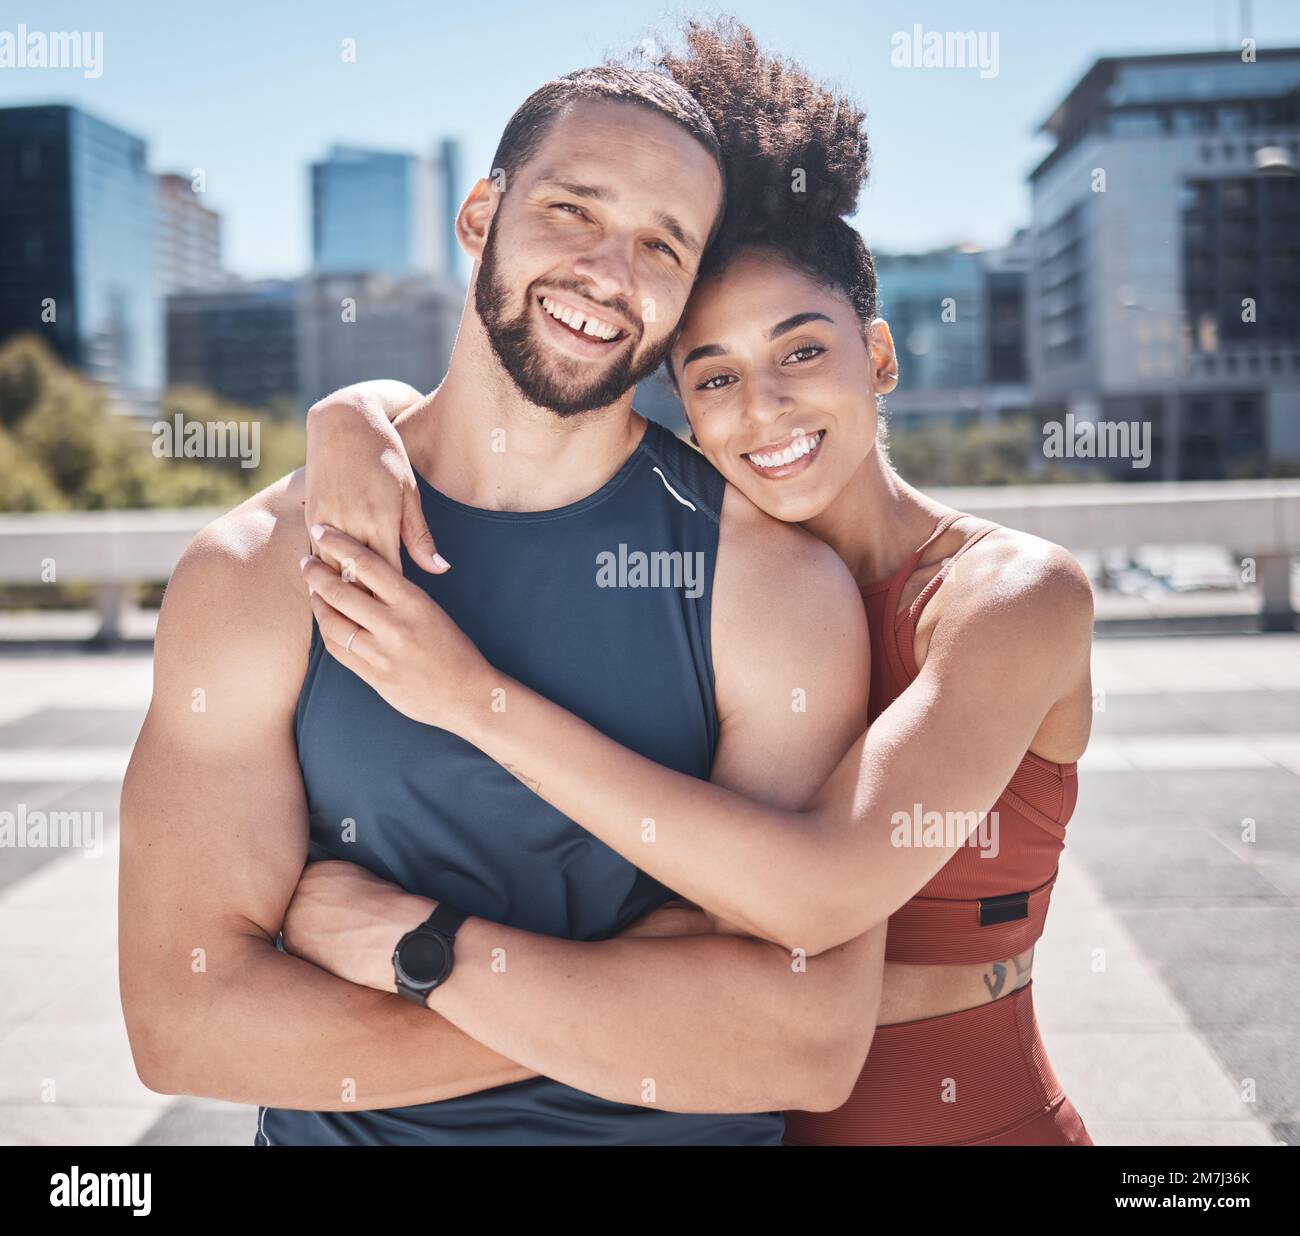 Fitness, portrait and couple of friends in city workout, training or exercise in support, love and motivation with hug for teamwork. Urban, sports and Stock Photo